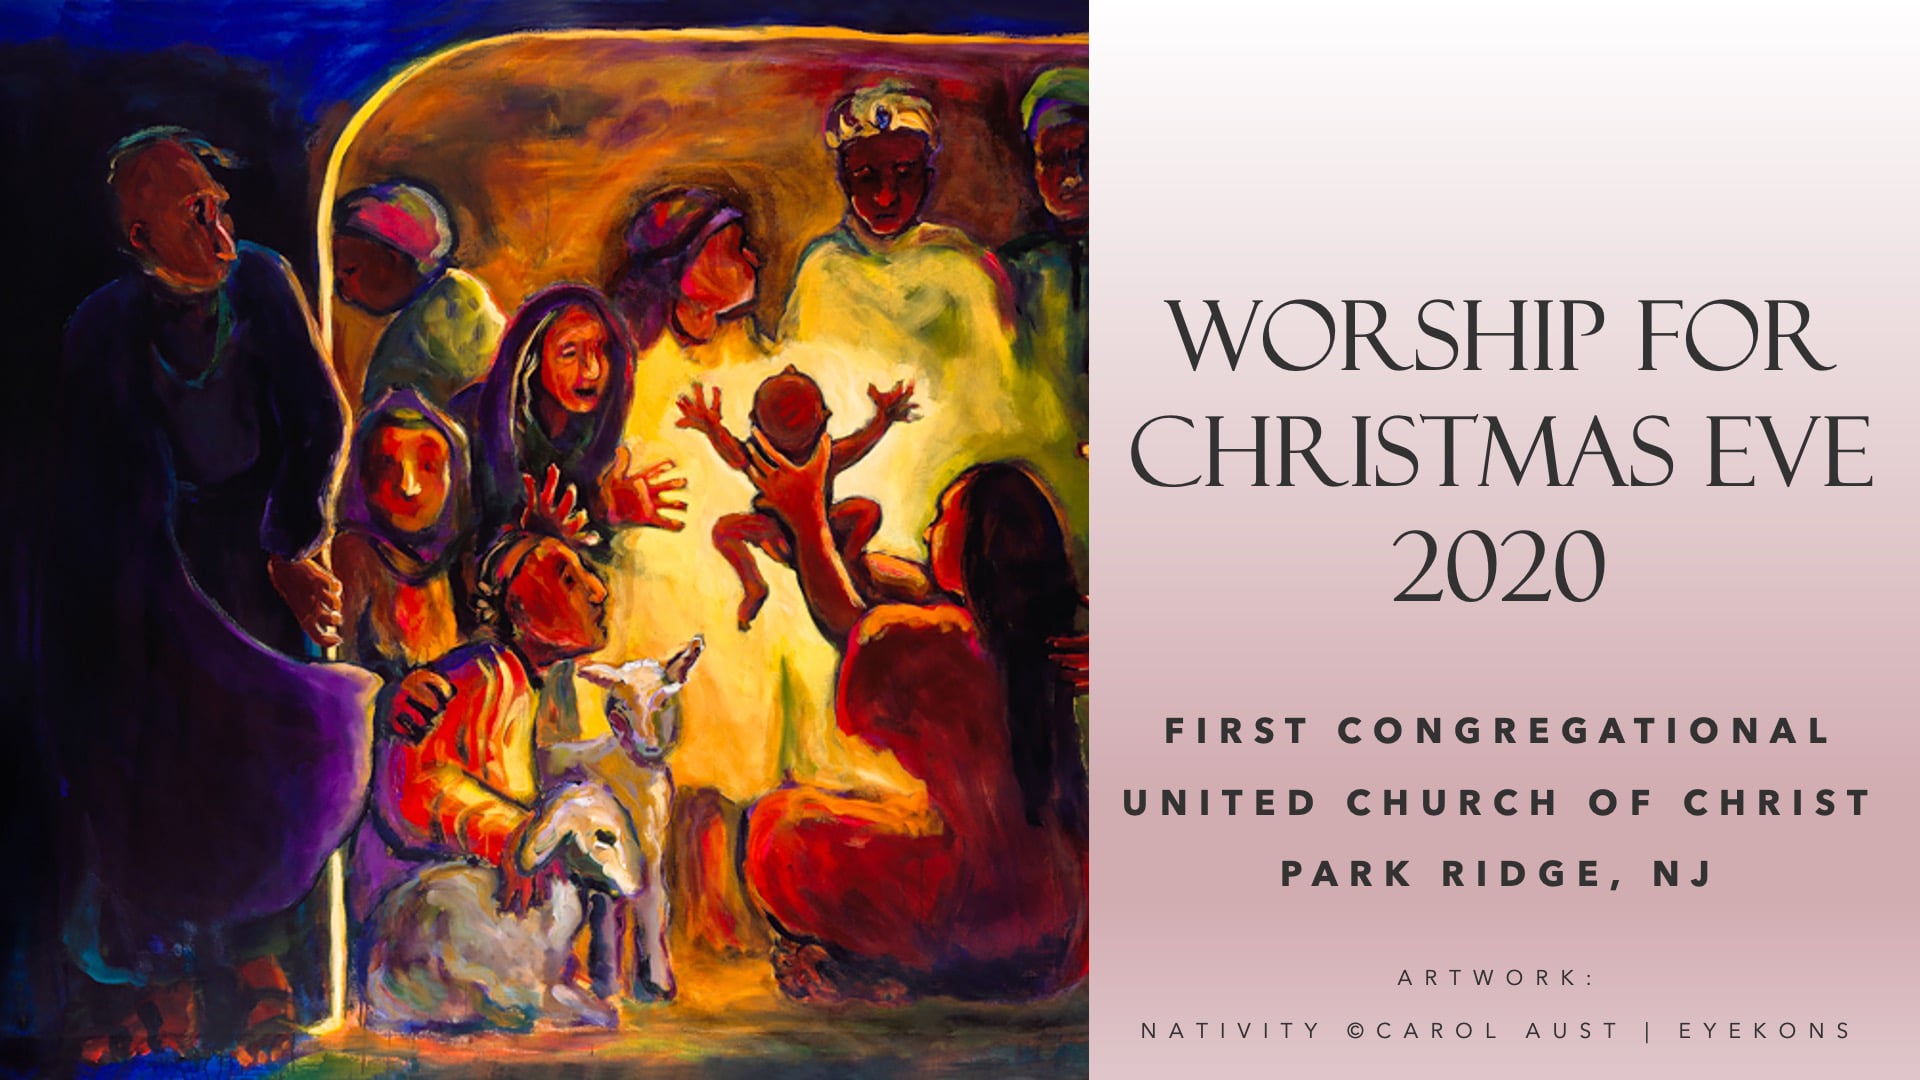 Worship for Christmas Eve 2020 - First Congregational United Church of Christ - Park Ridge